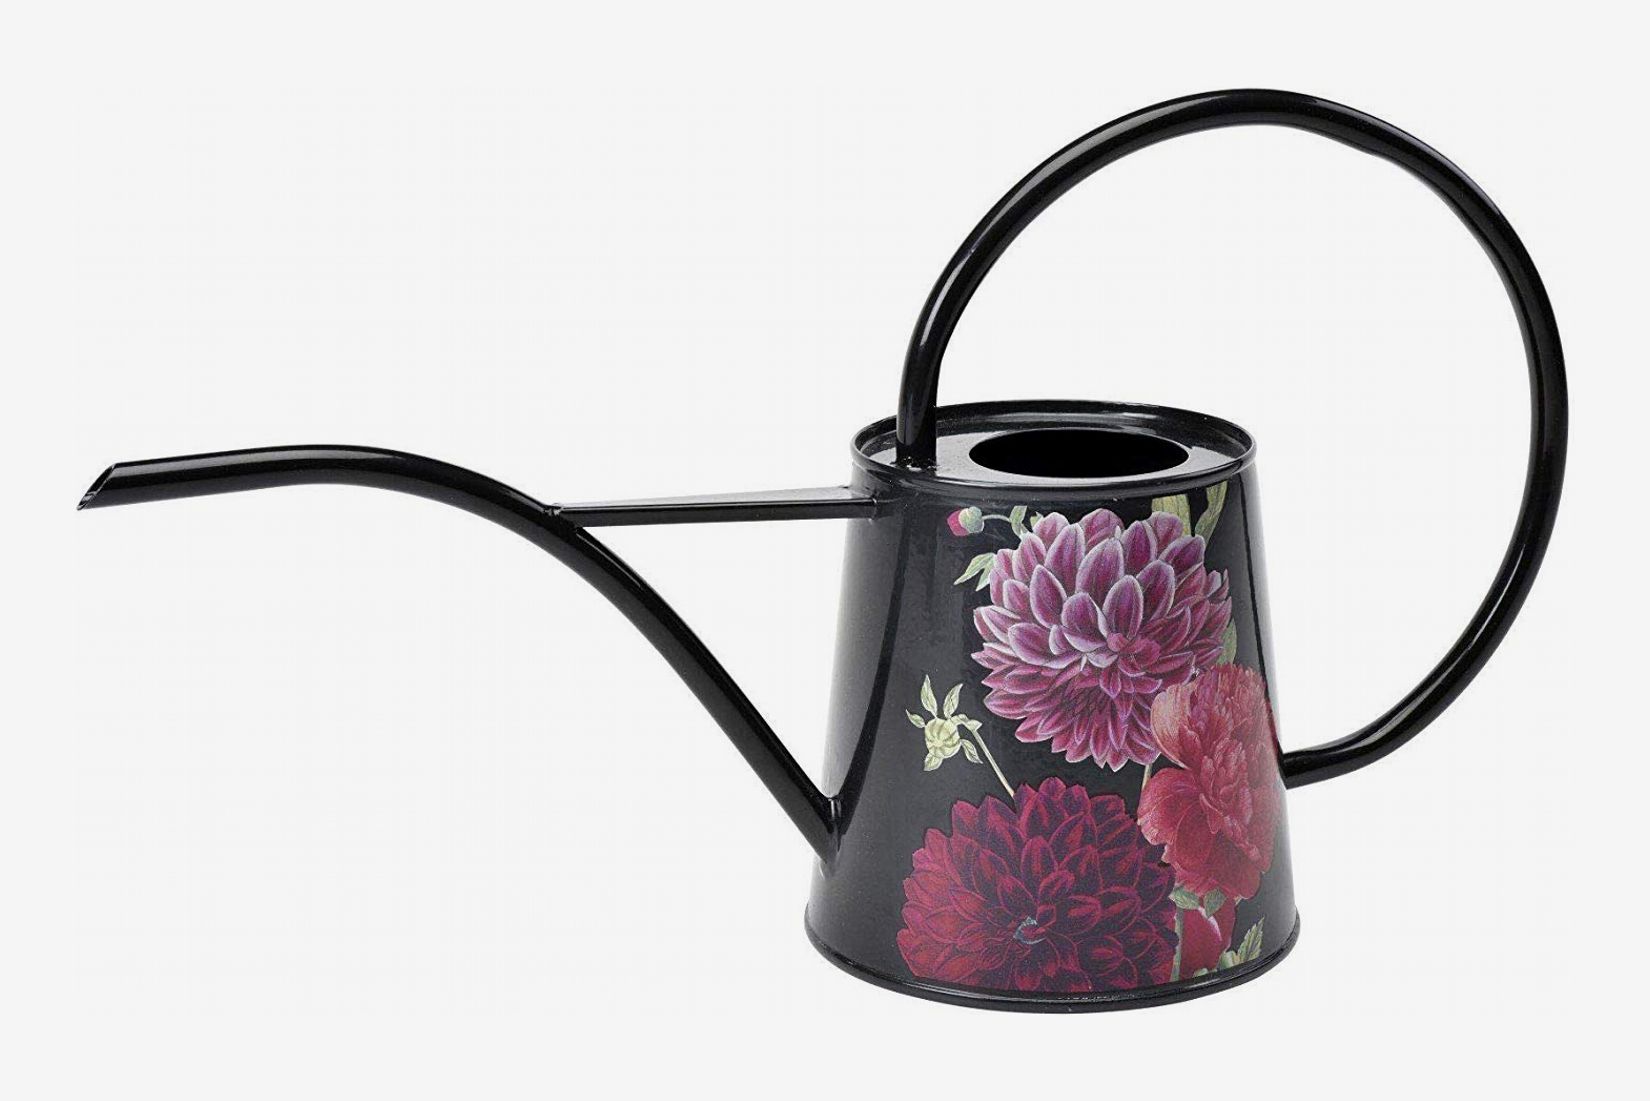 Yardwe Watering Can Iron Pot for Indoor Outdoor Plant Watering Can Vase Kettle Flower Pot Home Decorative Water Kettle Metal Flower Bucket for House Office Desk Kitchen Decoration 